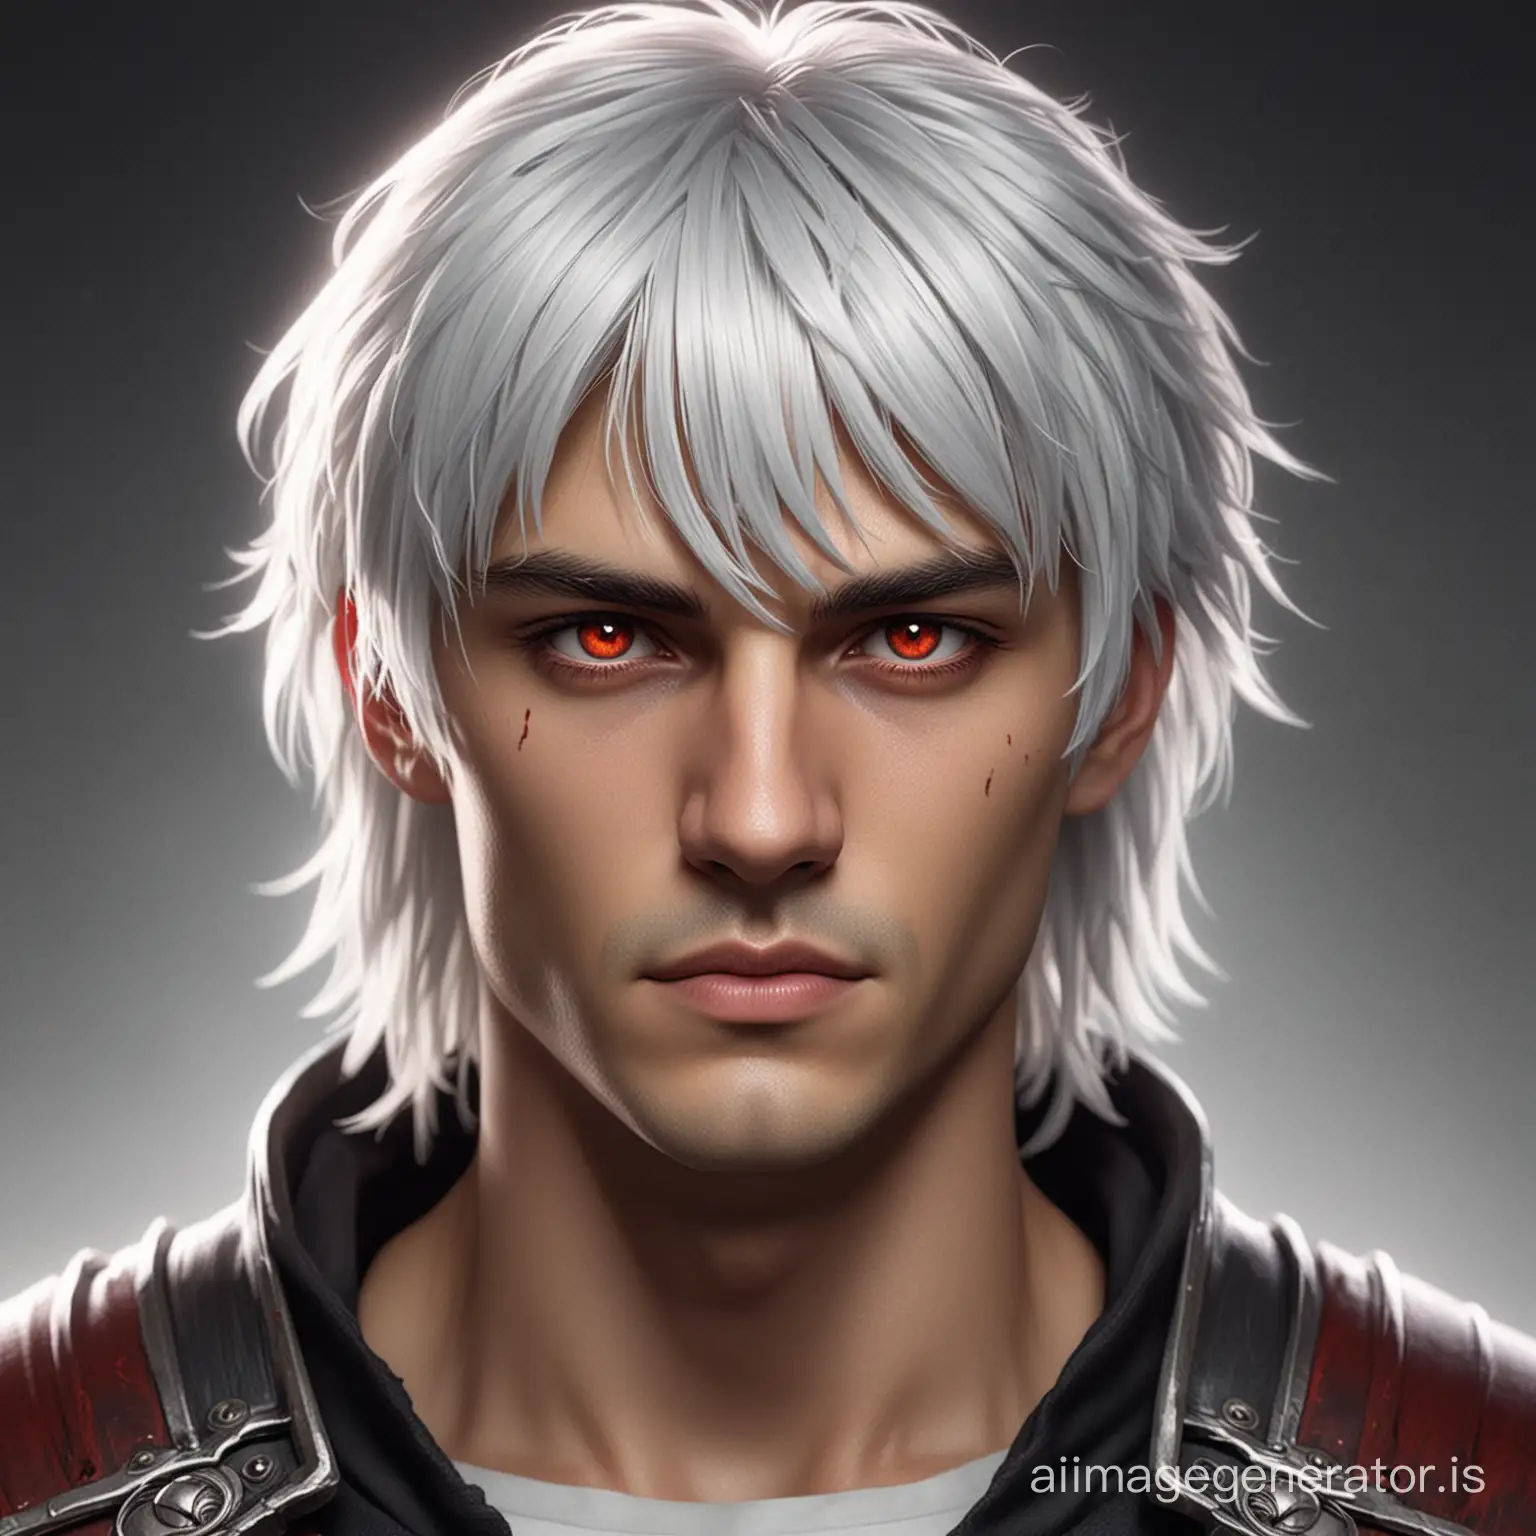 the male is a warrior, medium haircut with bang, white hair, and red eyes.